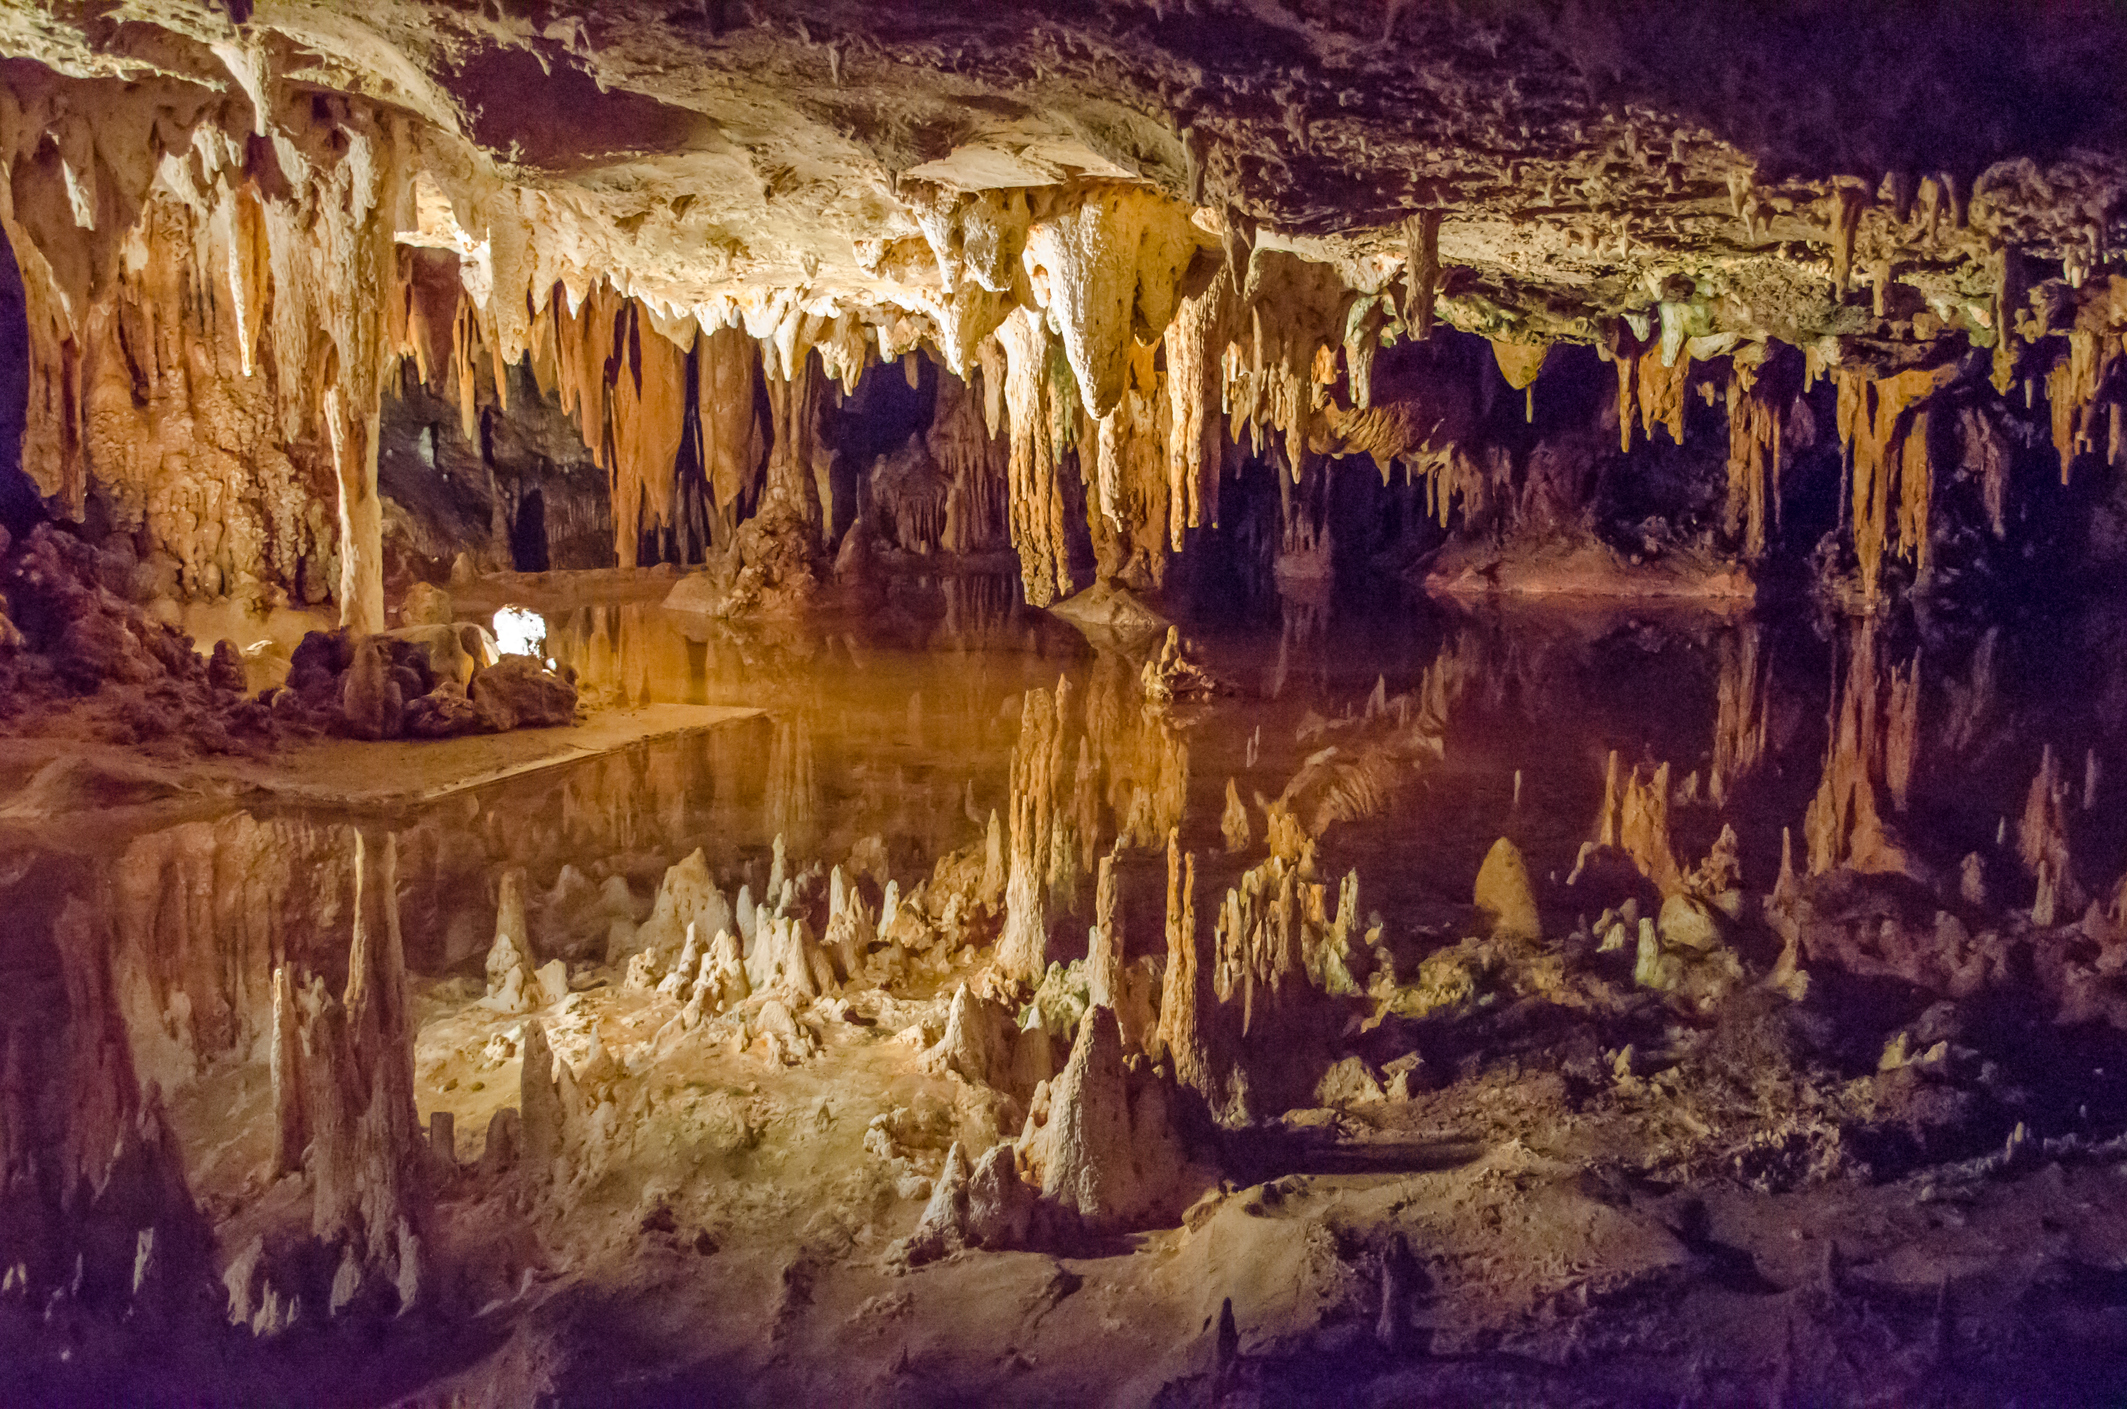 Stalactites reflected on water in an underground cavern.